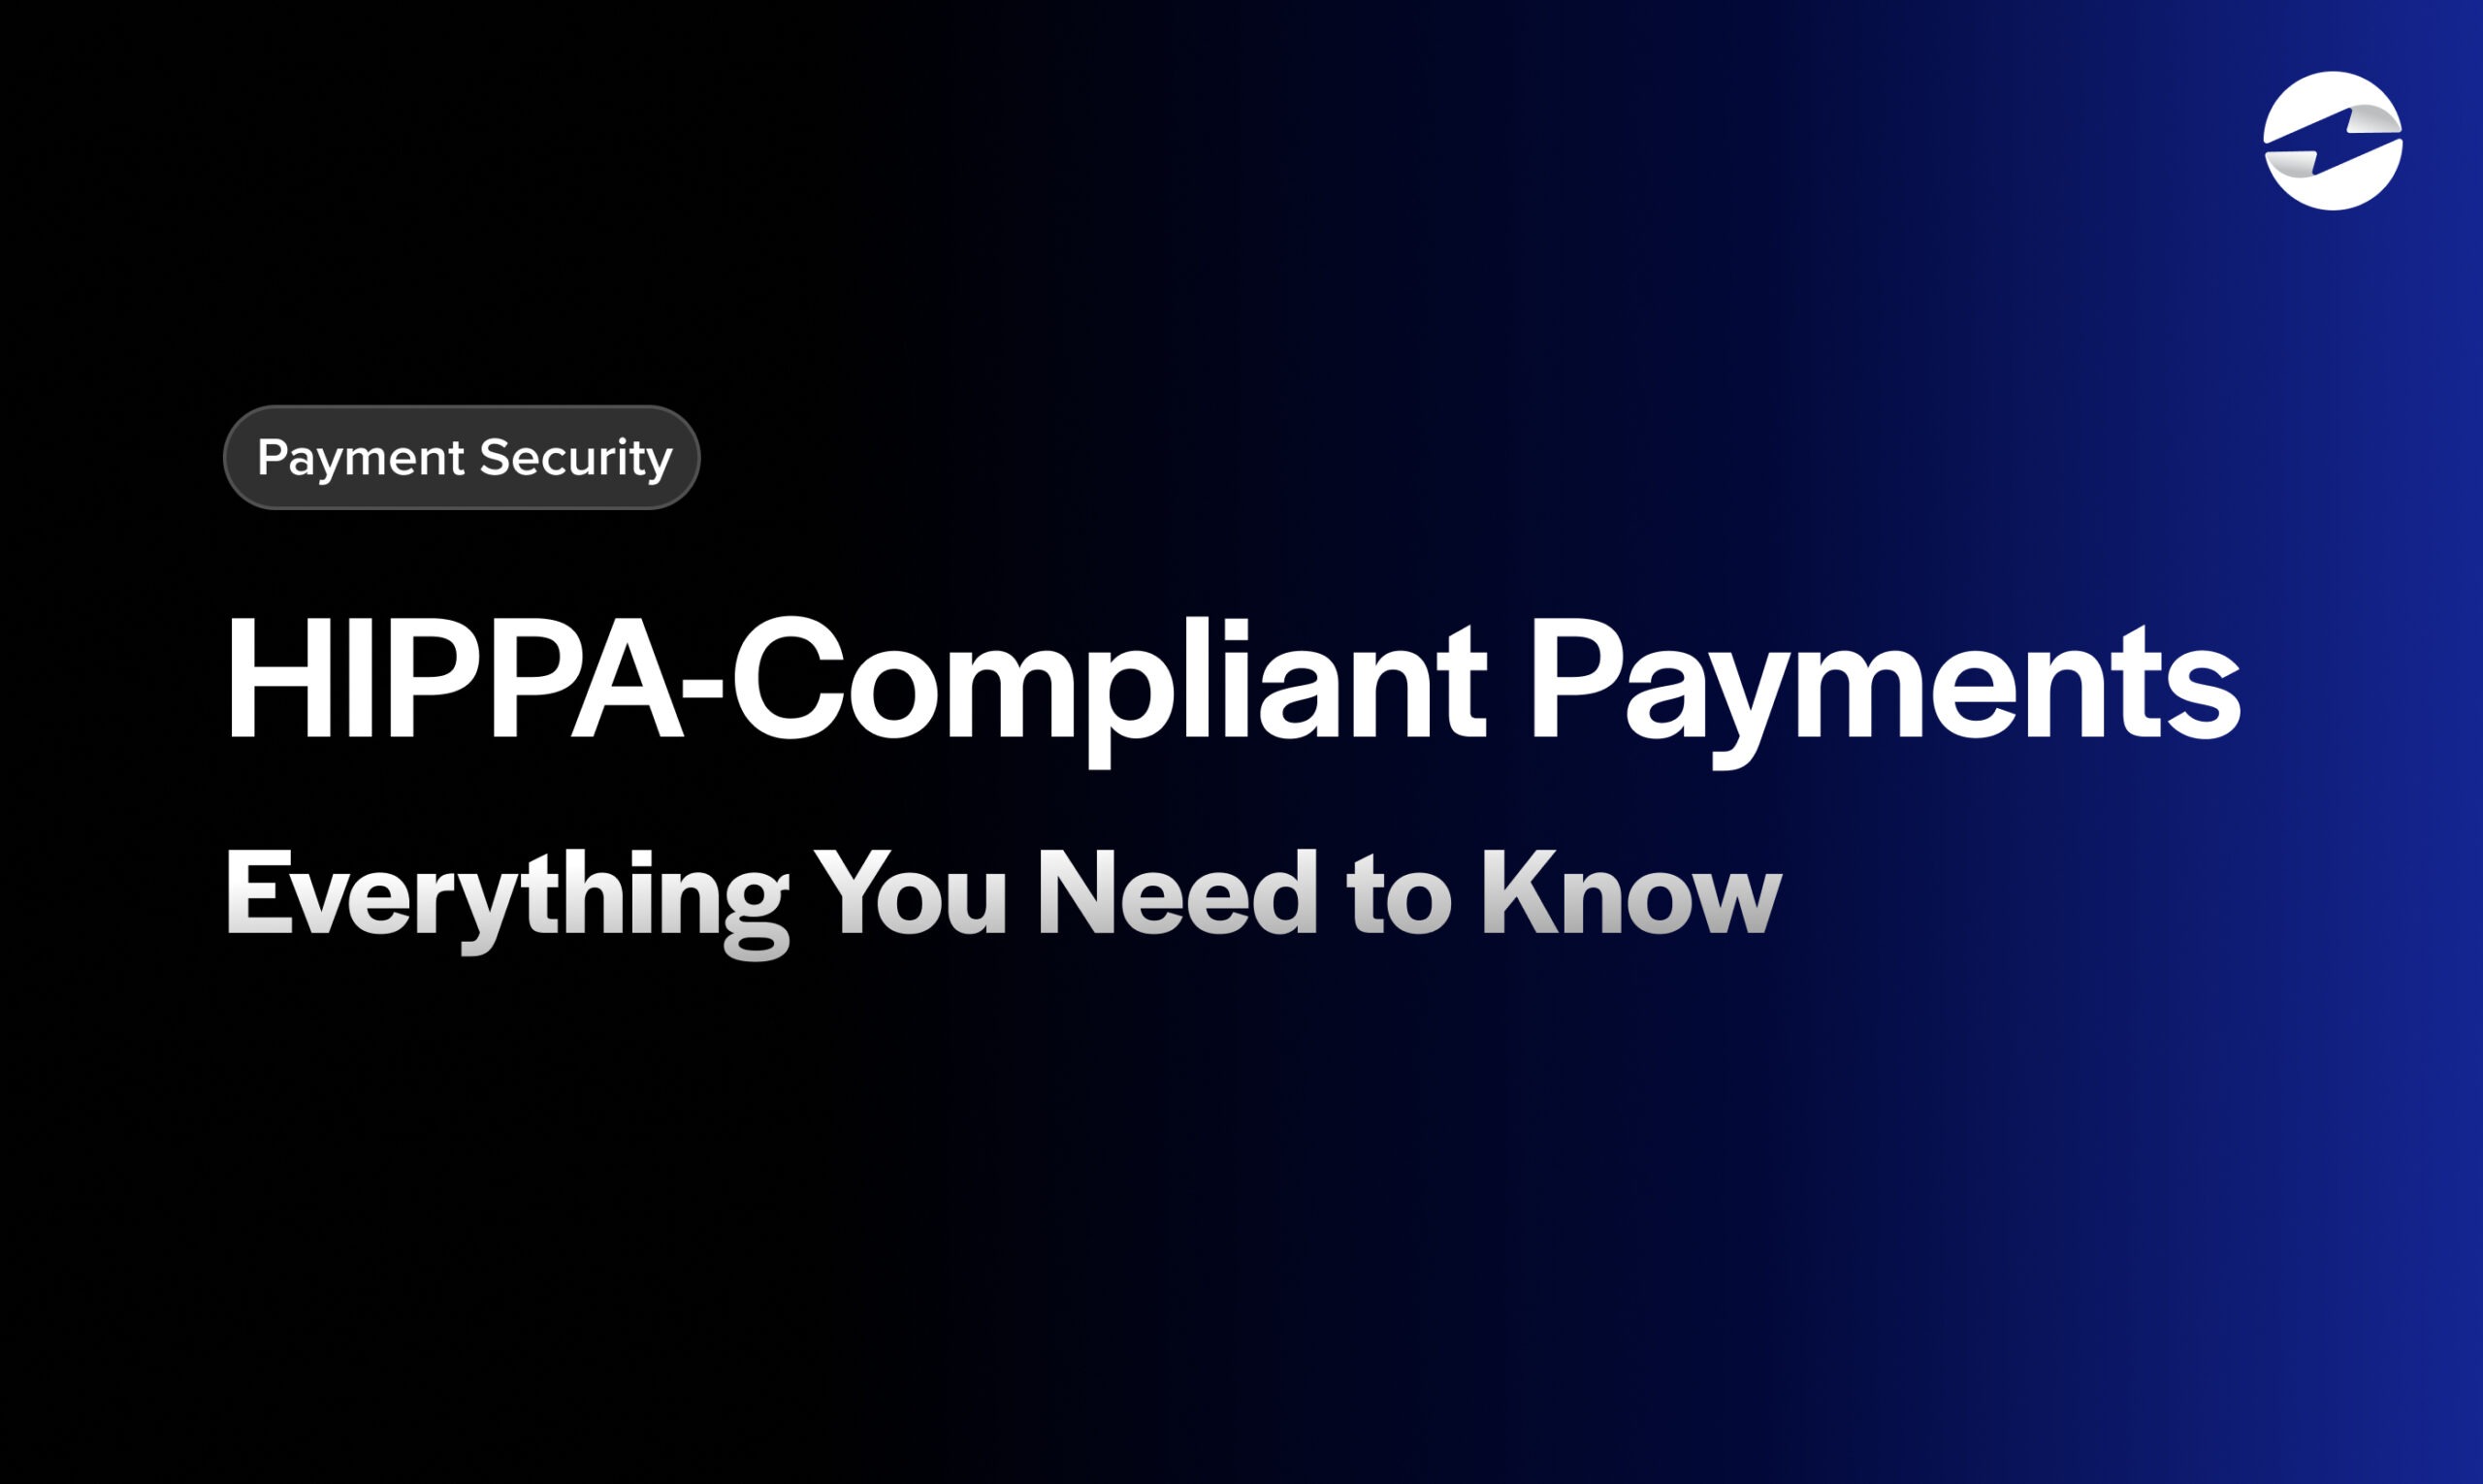 HIPAA-Compliant Payments: Everything You Need to Know